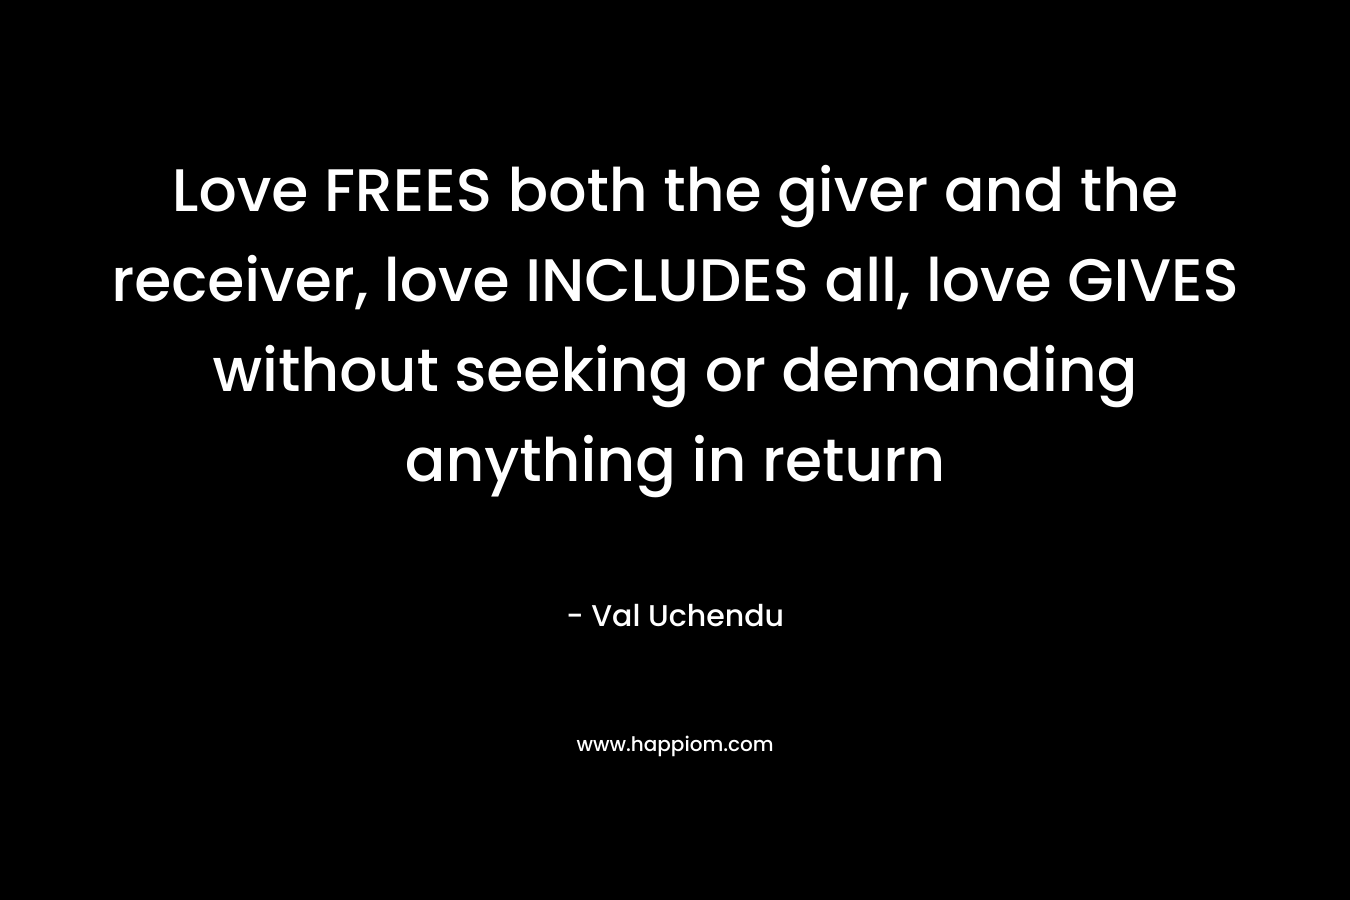 Love FREES both the giver and the receiver, love INCLUDES all, love GIVES without seeking or demanding anything in return